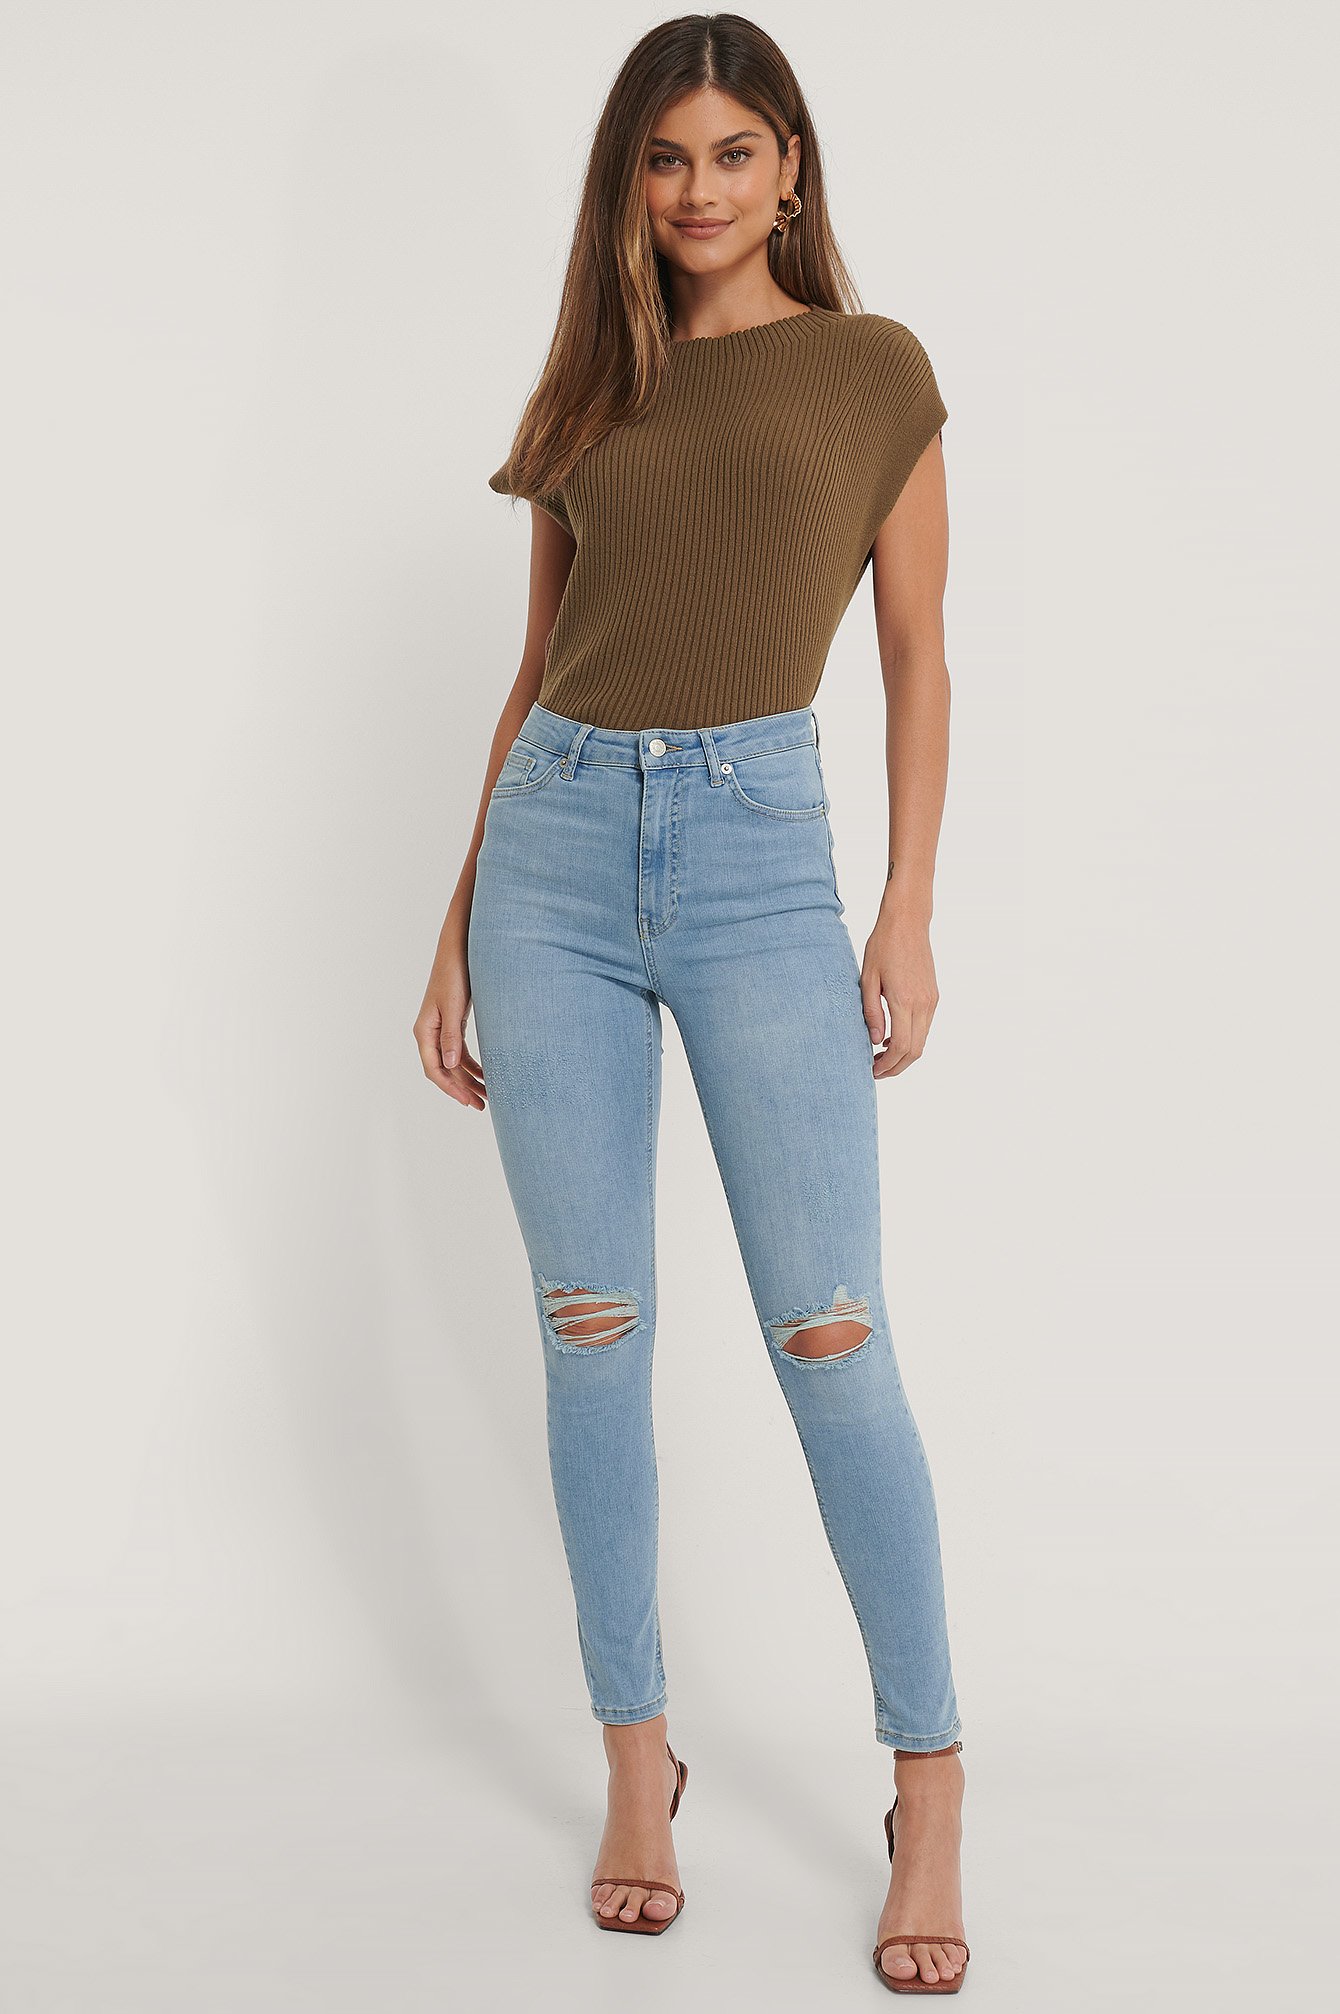 High Waisted Black Jeans Ripped Online Clearance, Save 45% | jlcatj.gob.mx